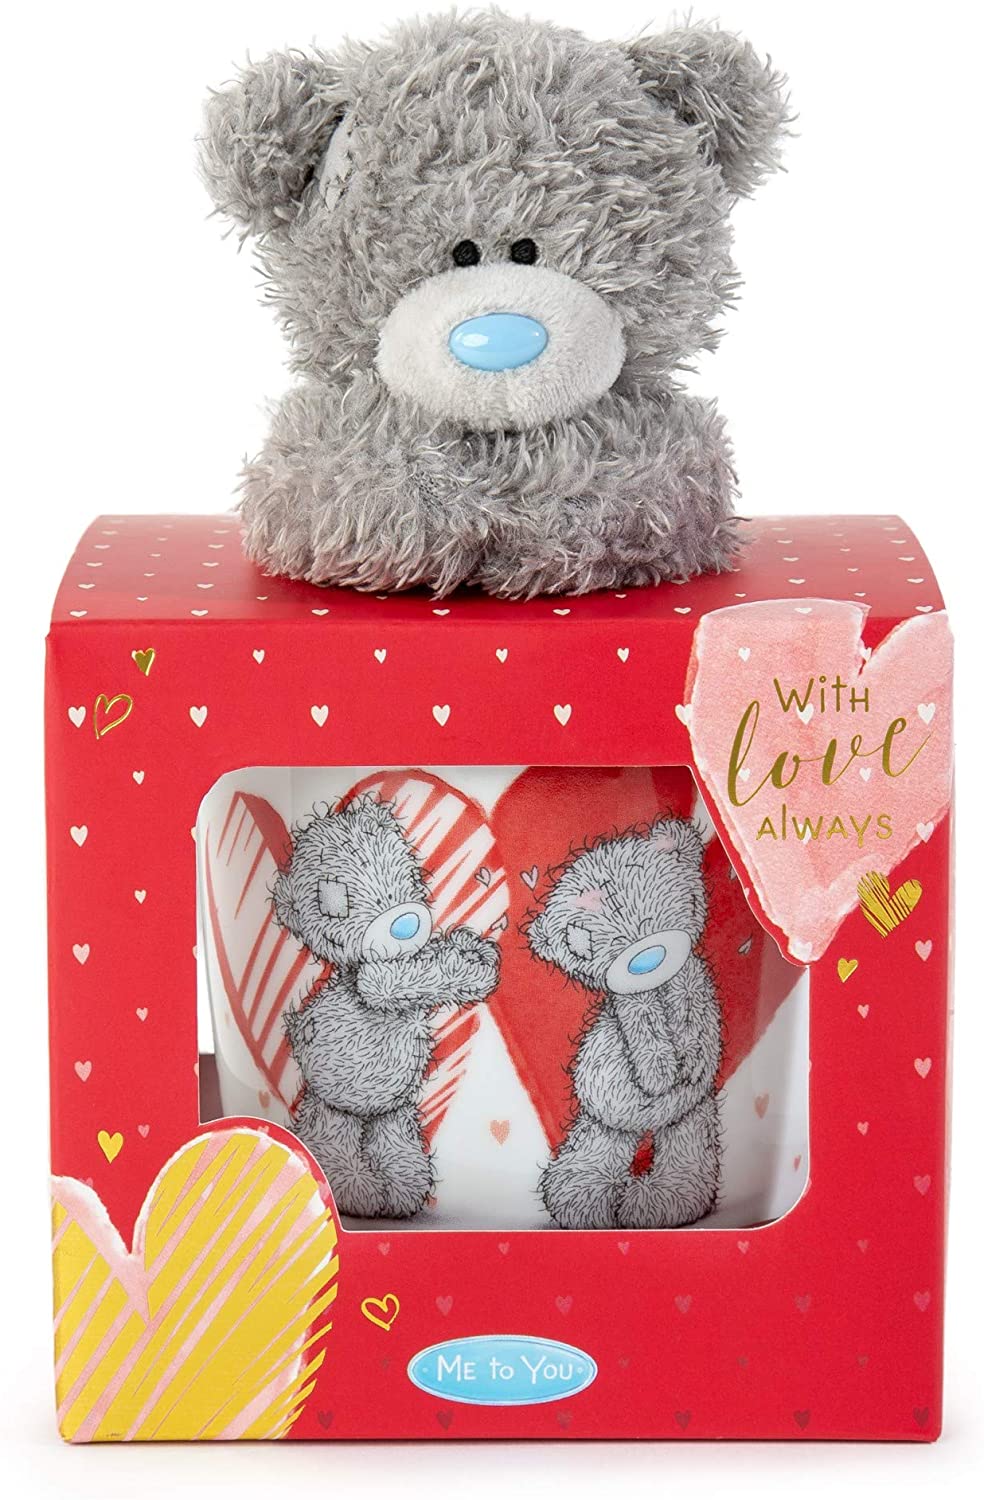 Tatty Teddy Soft Toy with 'In Love' Mug in a Gift Box